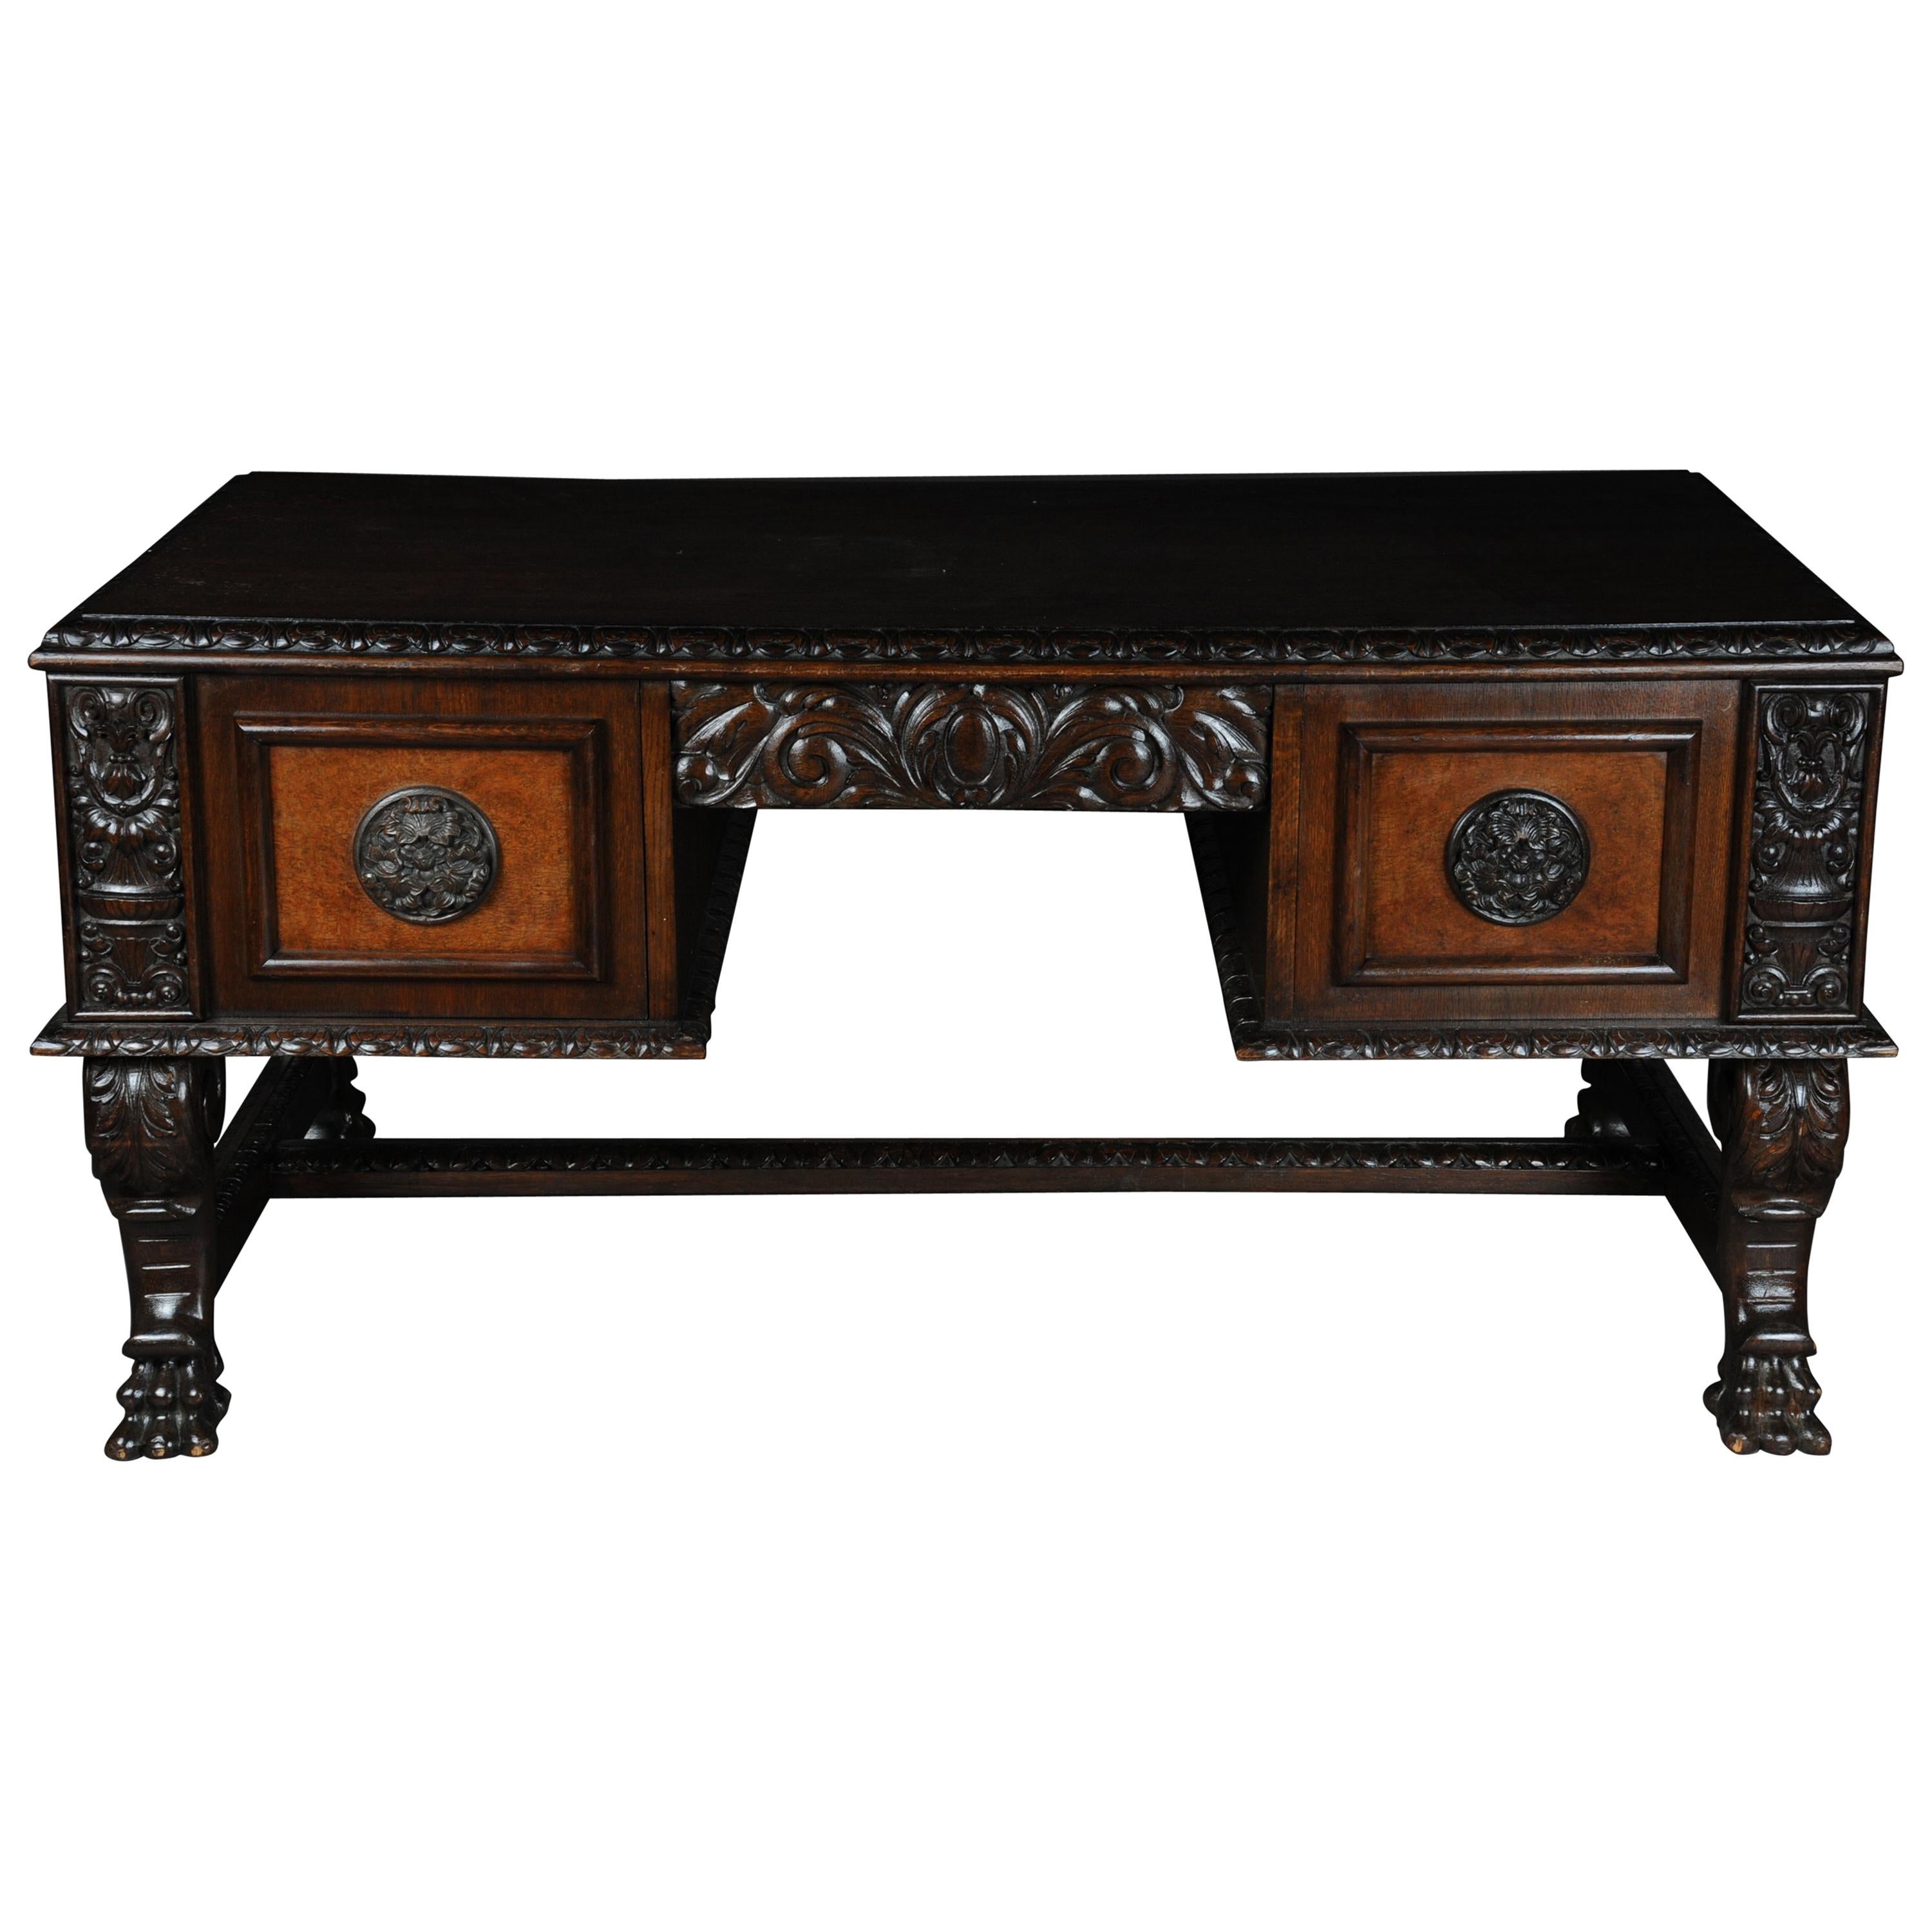 20th Century Lordly Historicism Desk Solid Oak with Walnut Veneer For Sale